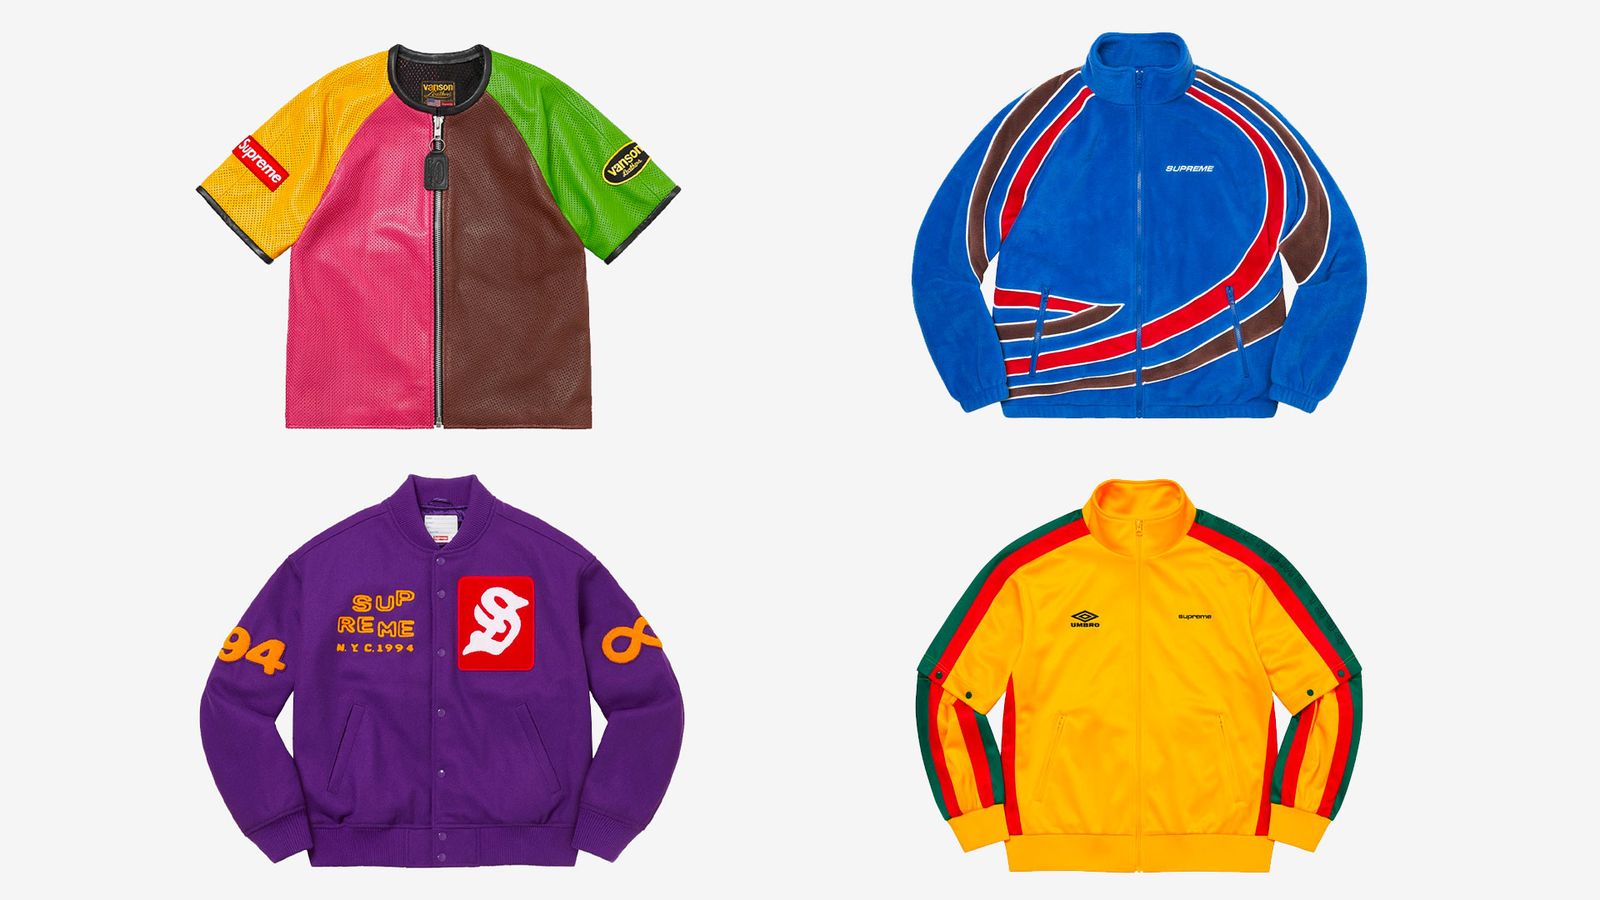 Supreme Spring/Summer 2023 collection - Outwear featuring a multi-coloured leather jacket, a purple bomber, a blue fleece, and a yellow Umbro collab.